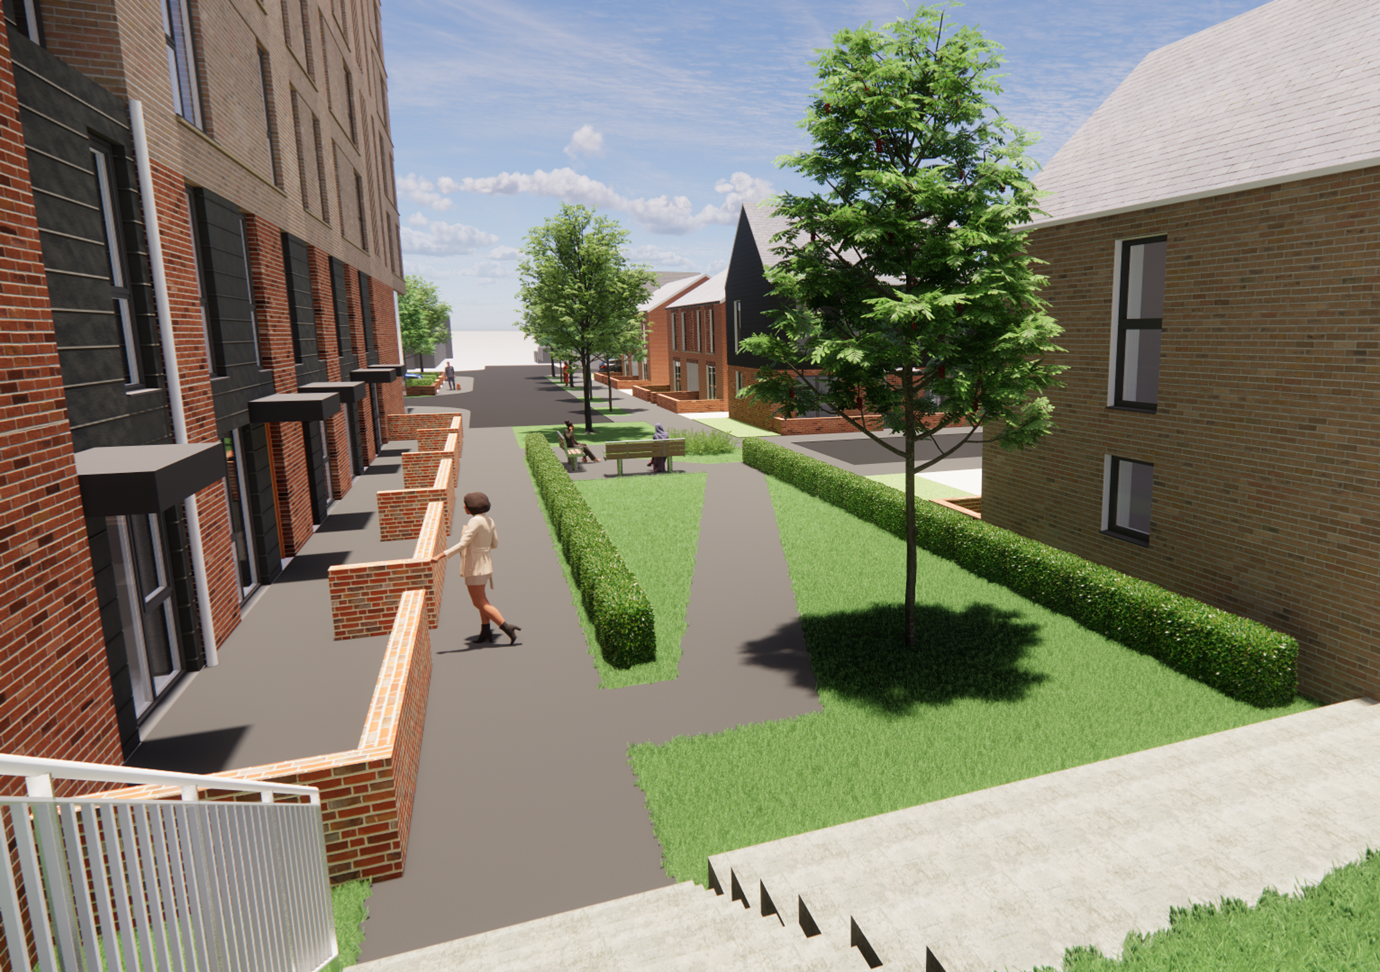 West Vale is set to be our new development right in the heart of Oldham. It will provide a range of high quality, affordable new homes in a vibrant neighbourhood where people, families and businesses can thrive.